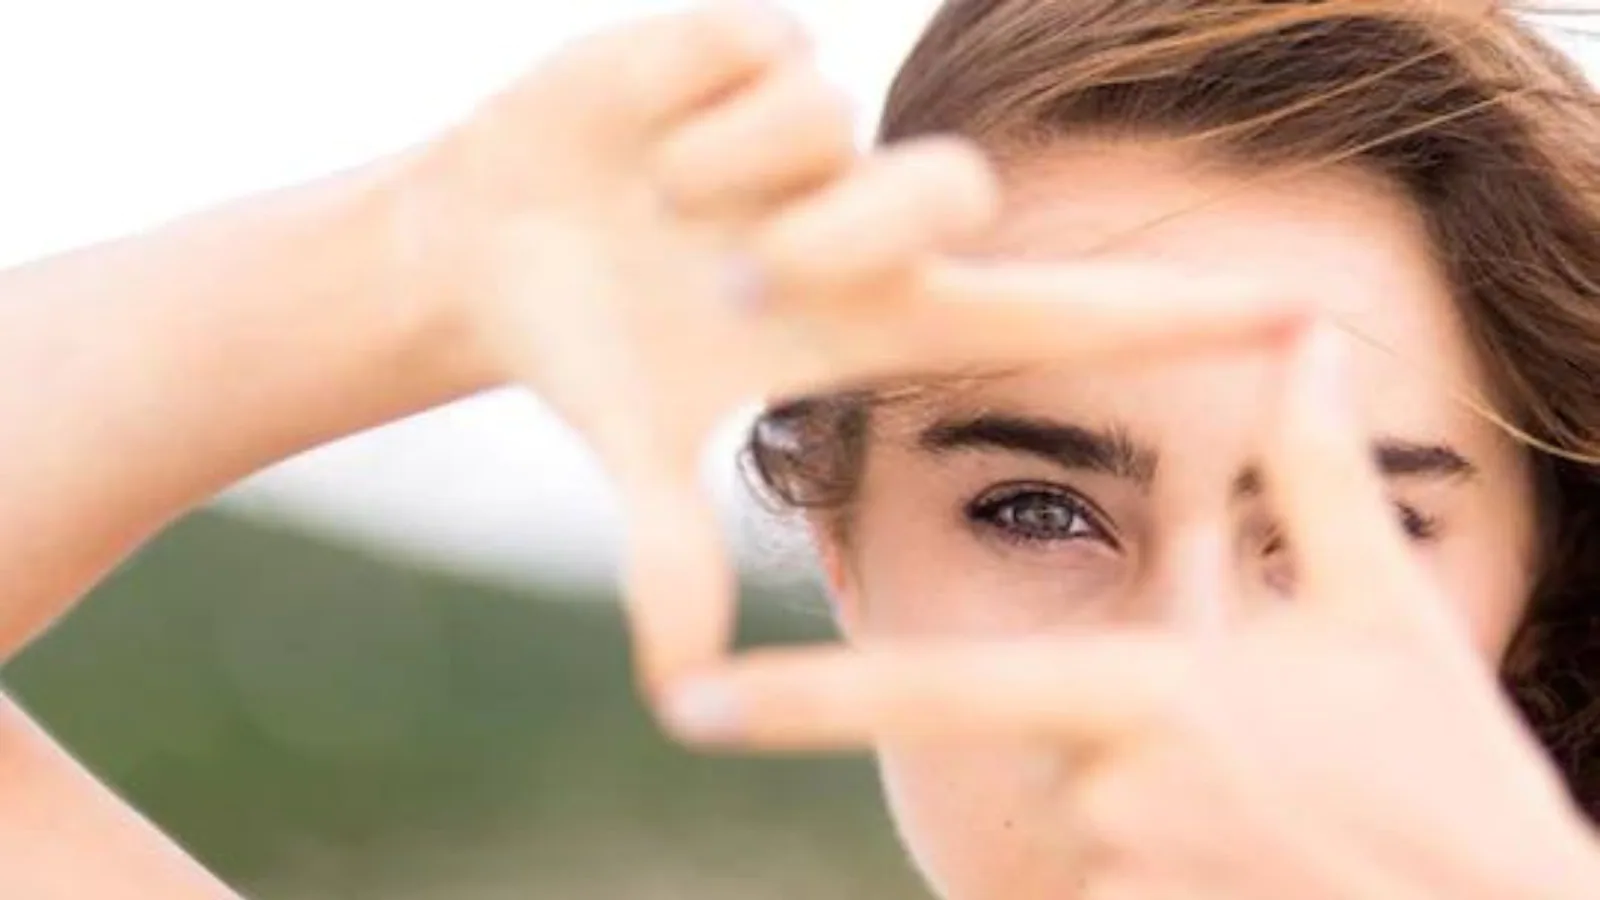 Simple Exercises to Strengthen Eye Muscles and Improve Vision